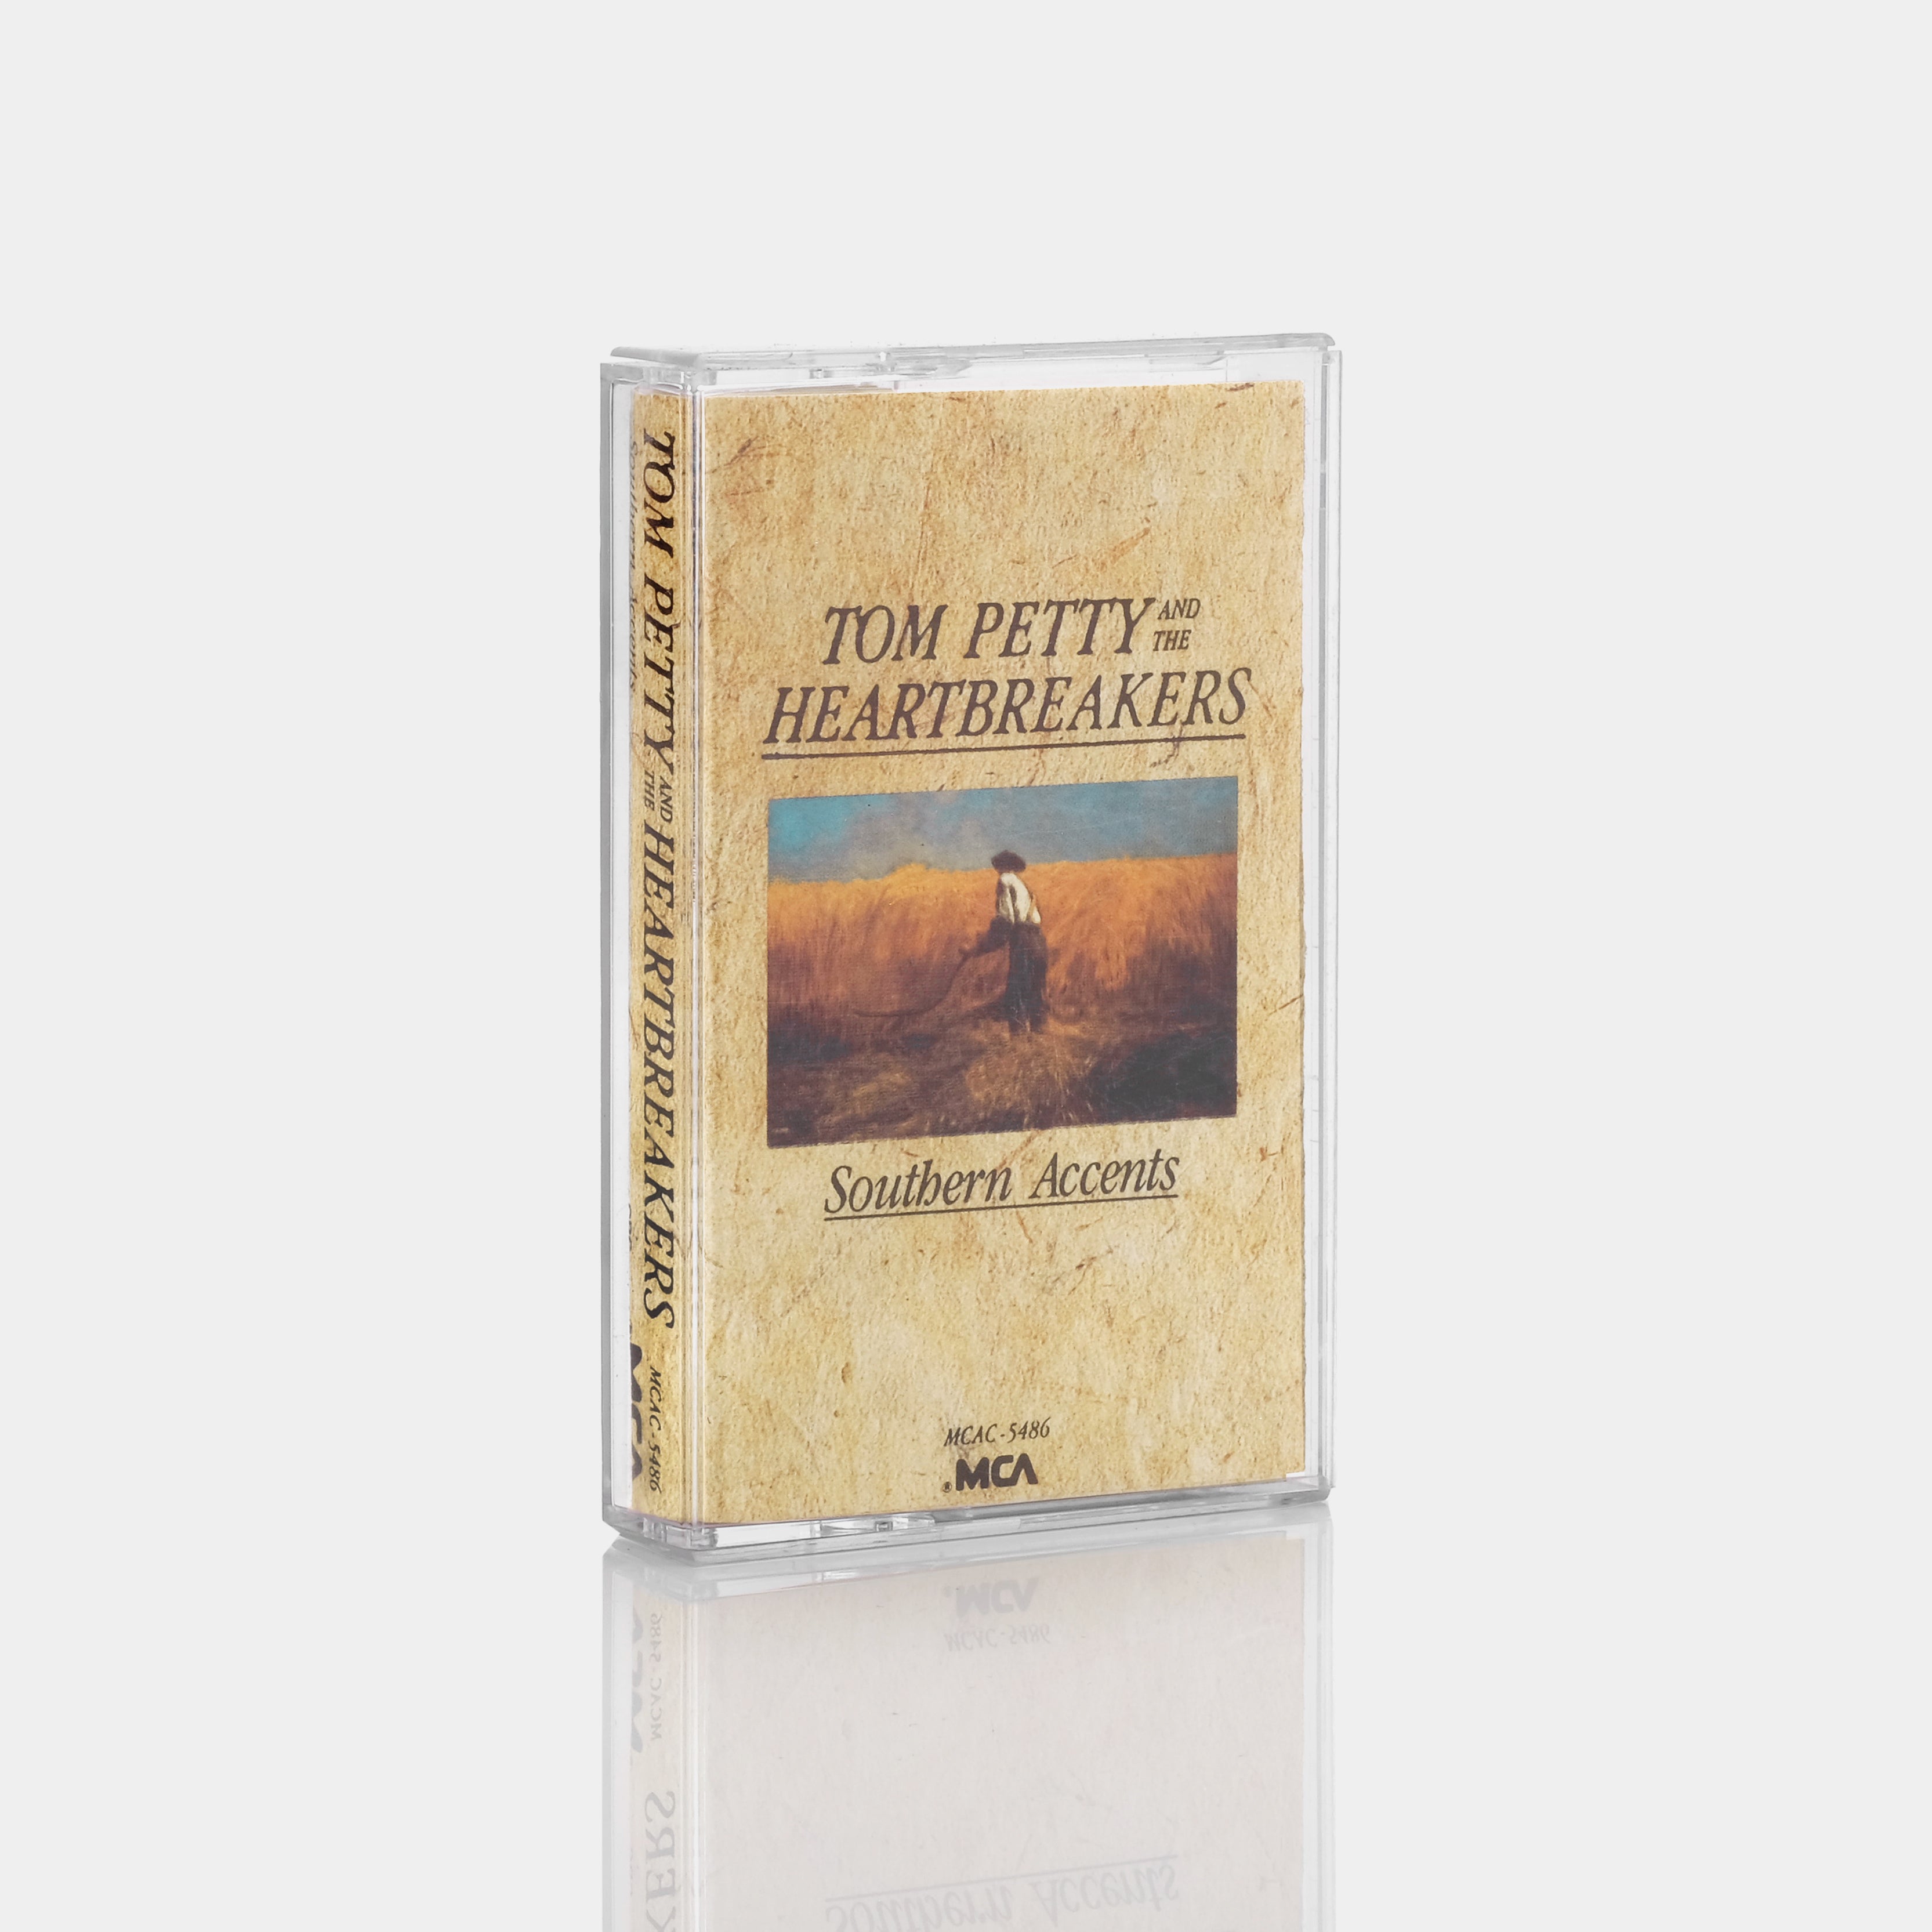 Tom Petty And The Heartbreakers - Southern Accents Cassette Tape